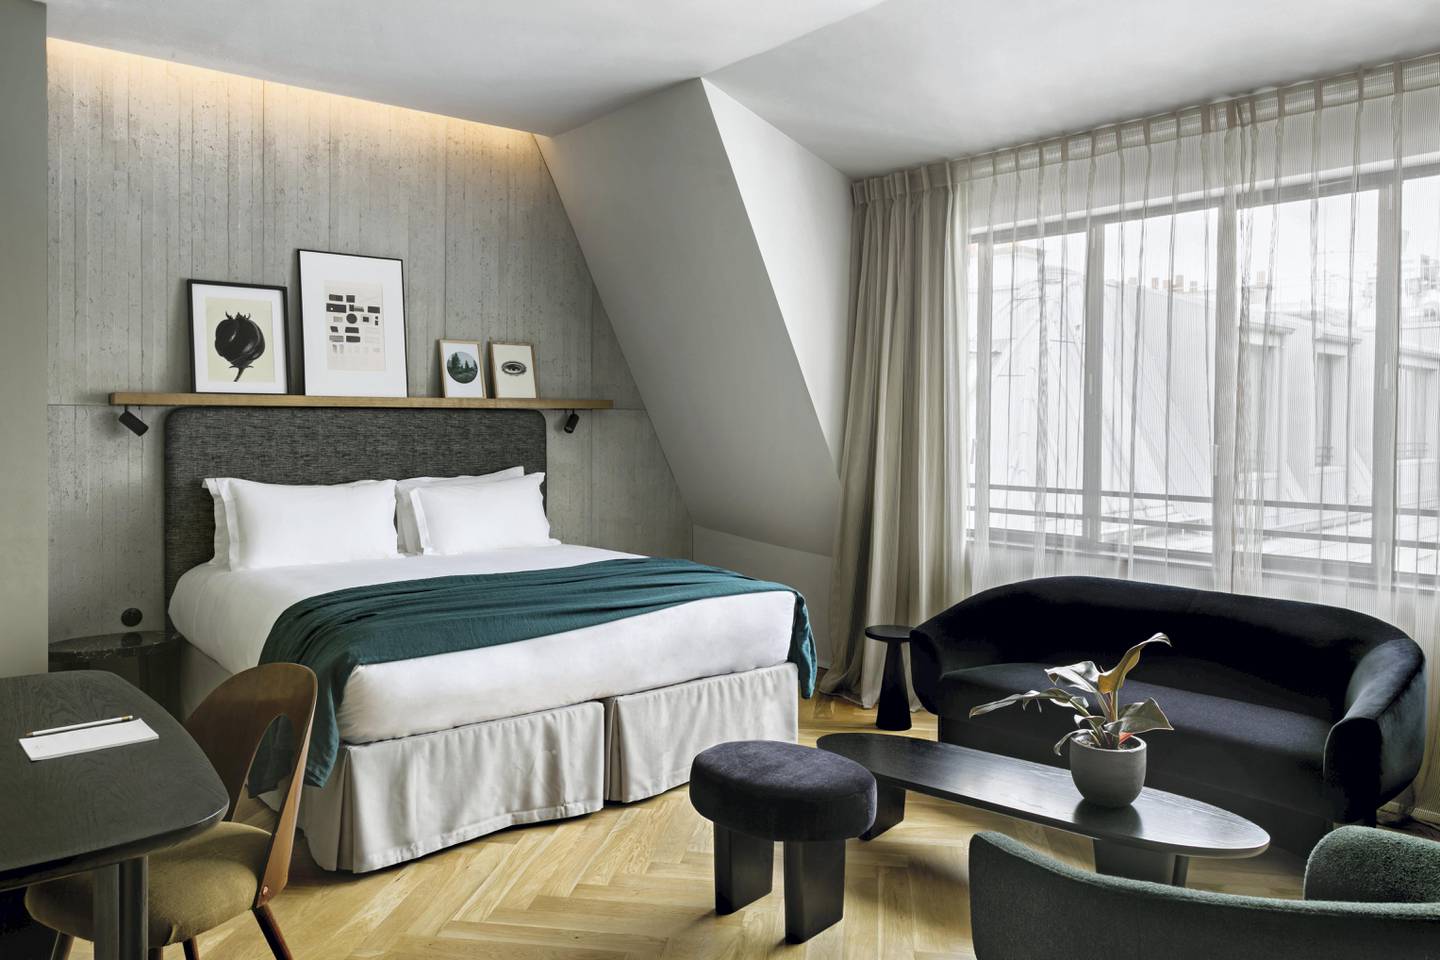 A guest room at Hotel National des Arts and Metiers. Photo by Jérôme Galland